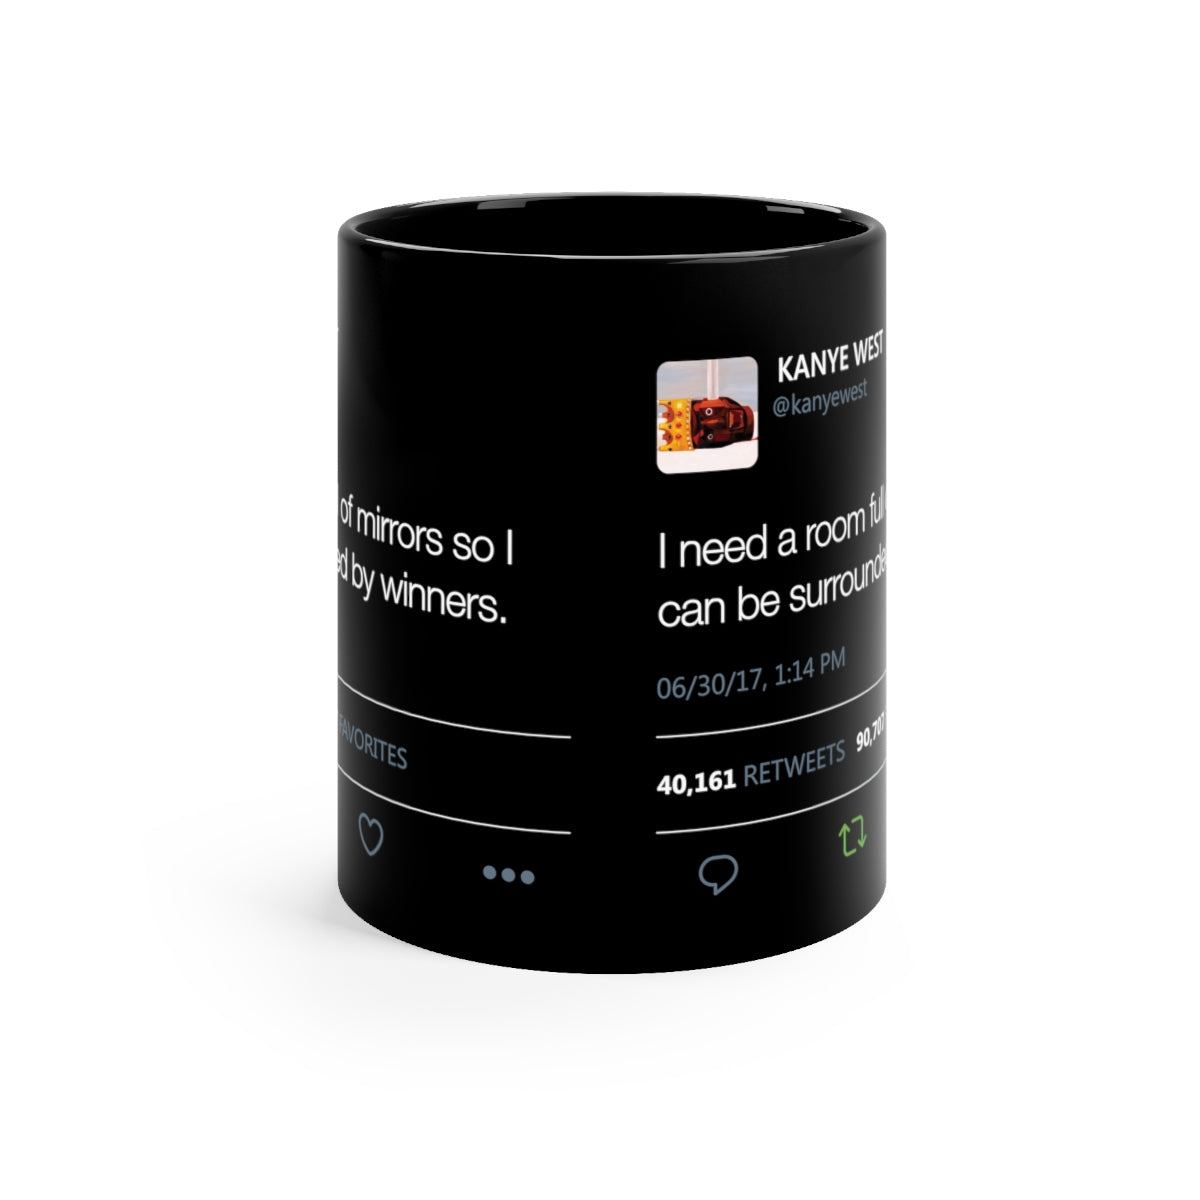 I need a room full of mirrors so I can be surrounded by winners - Kanye West black Mug Tweet Inspired-11oz-Archethype